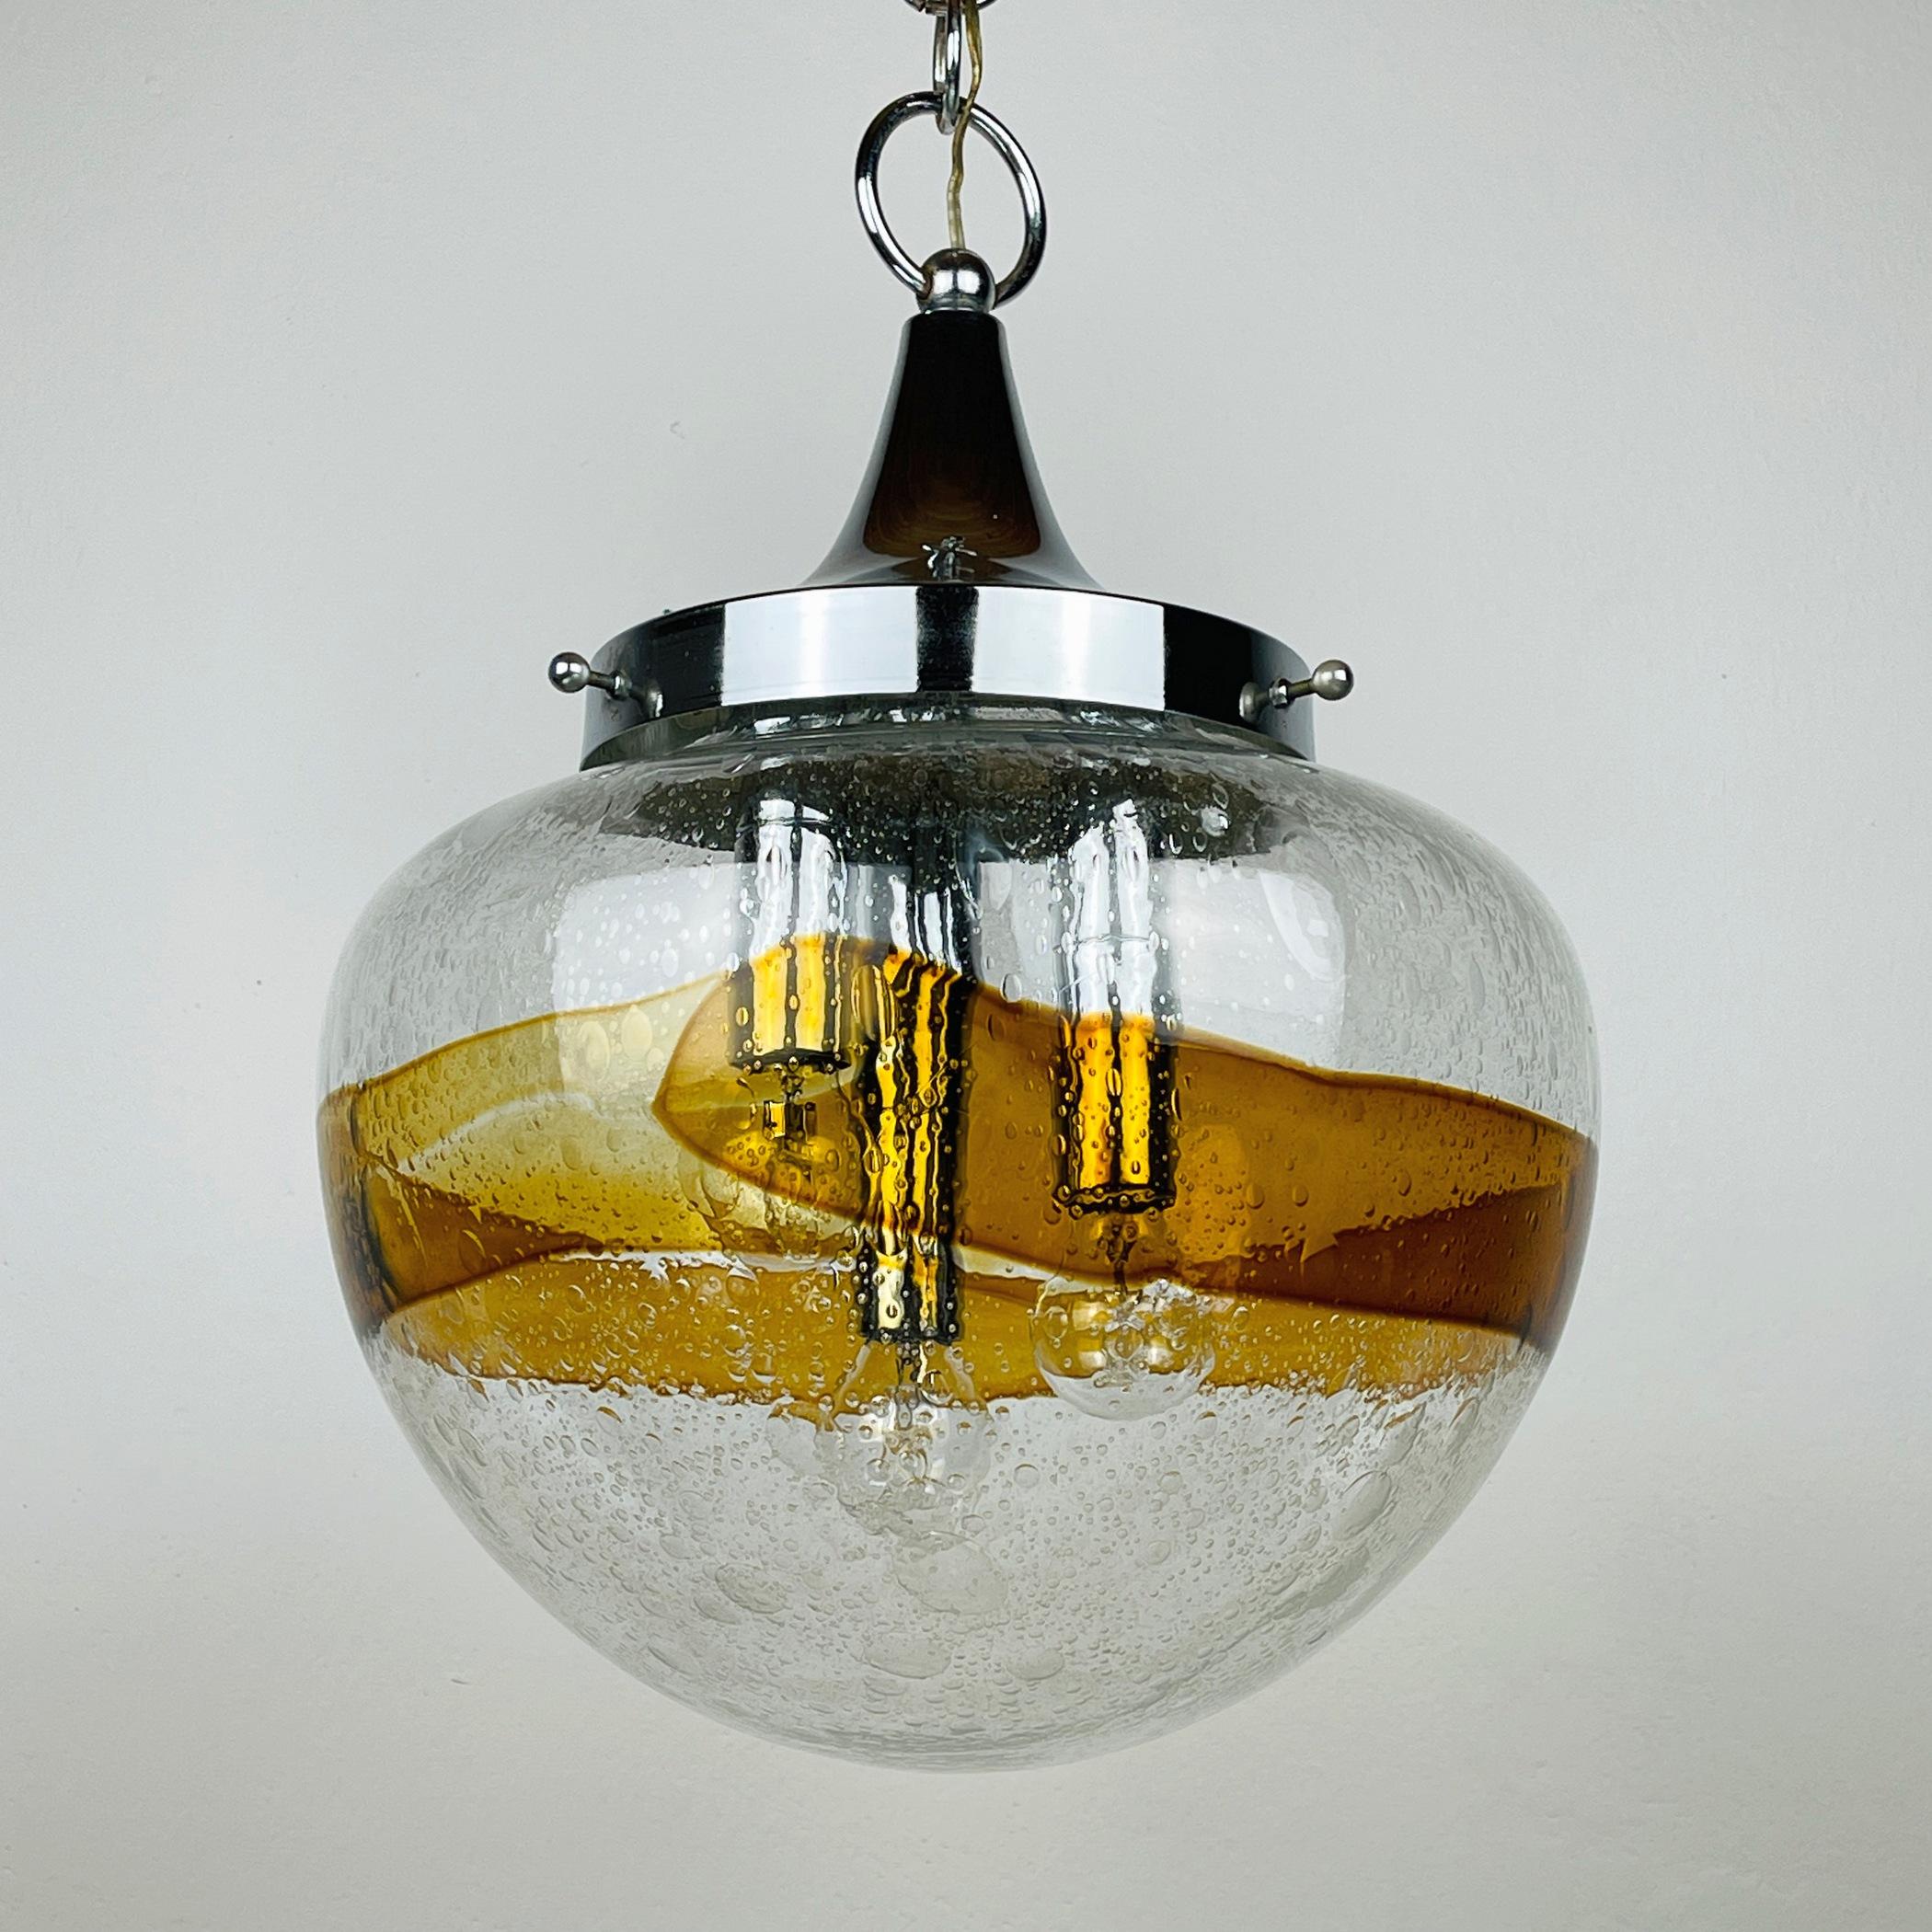 The exquisite hand-blown Murano glass pendant lamp, hailing from 1970s Italy. This masterpiece showcases a transparent glass shade adorned with a captivating 